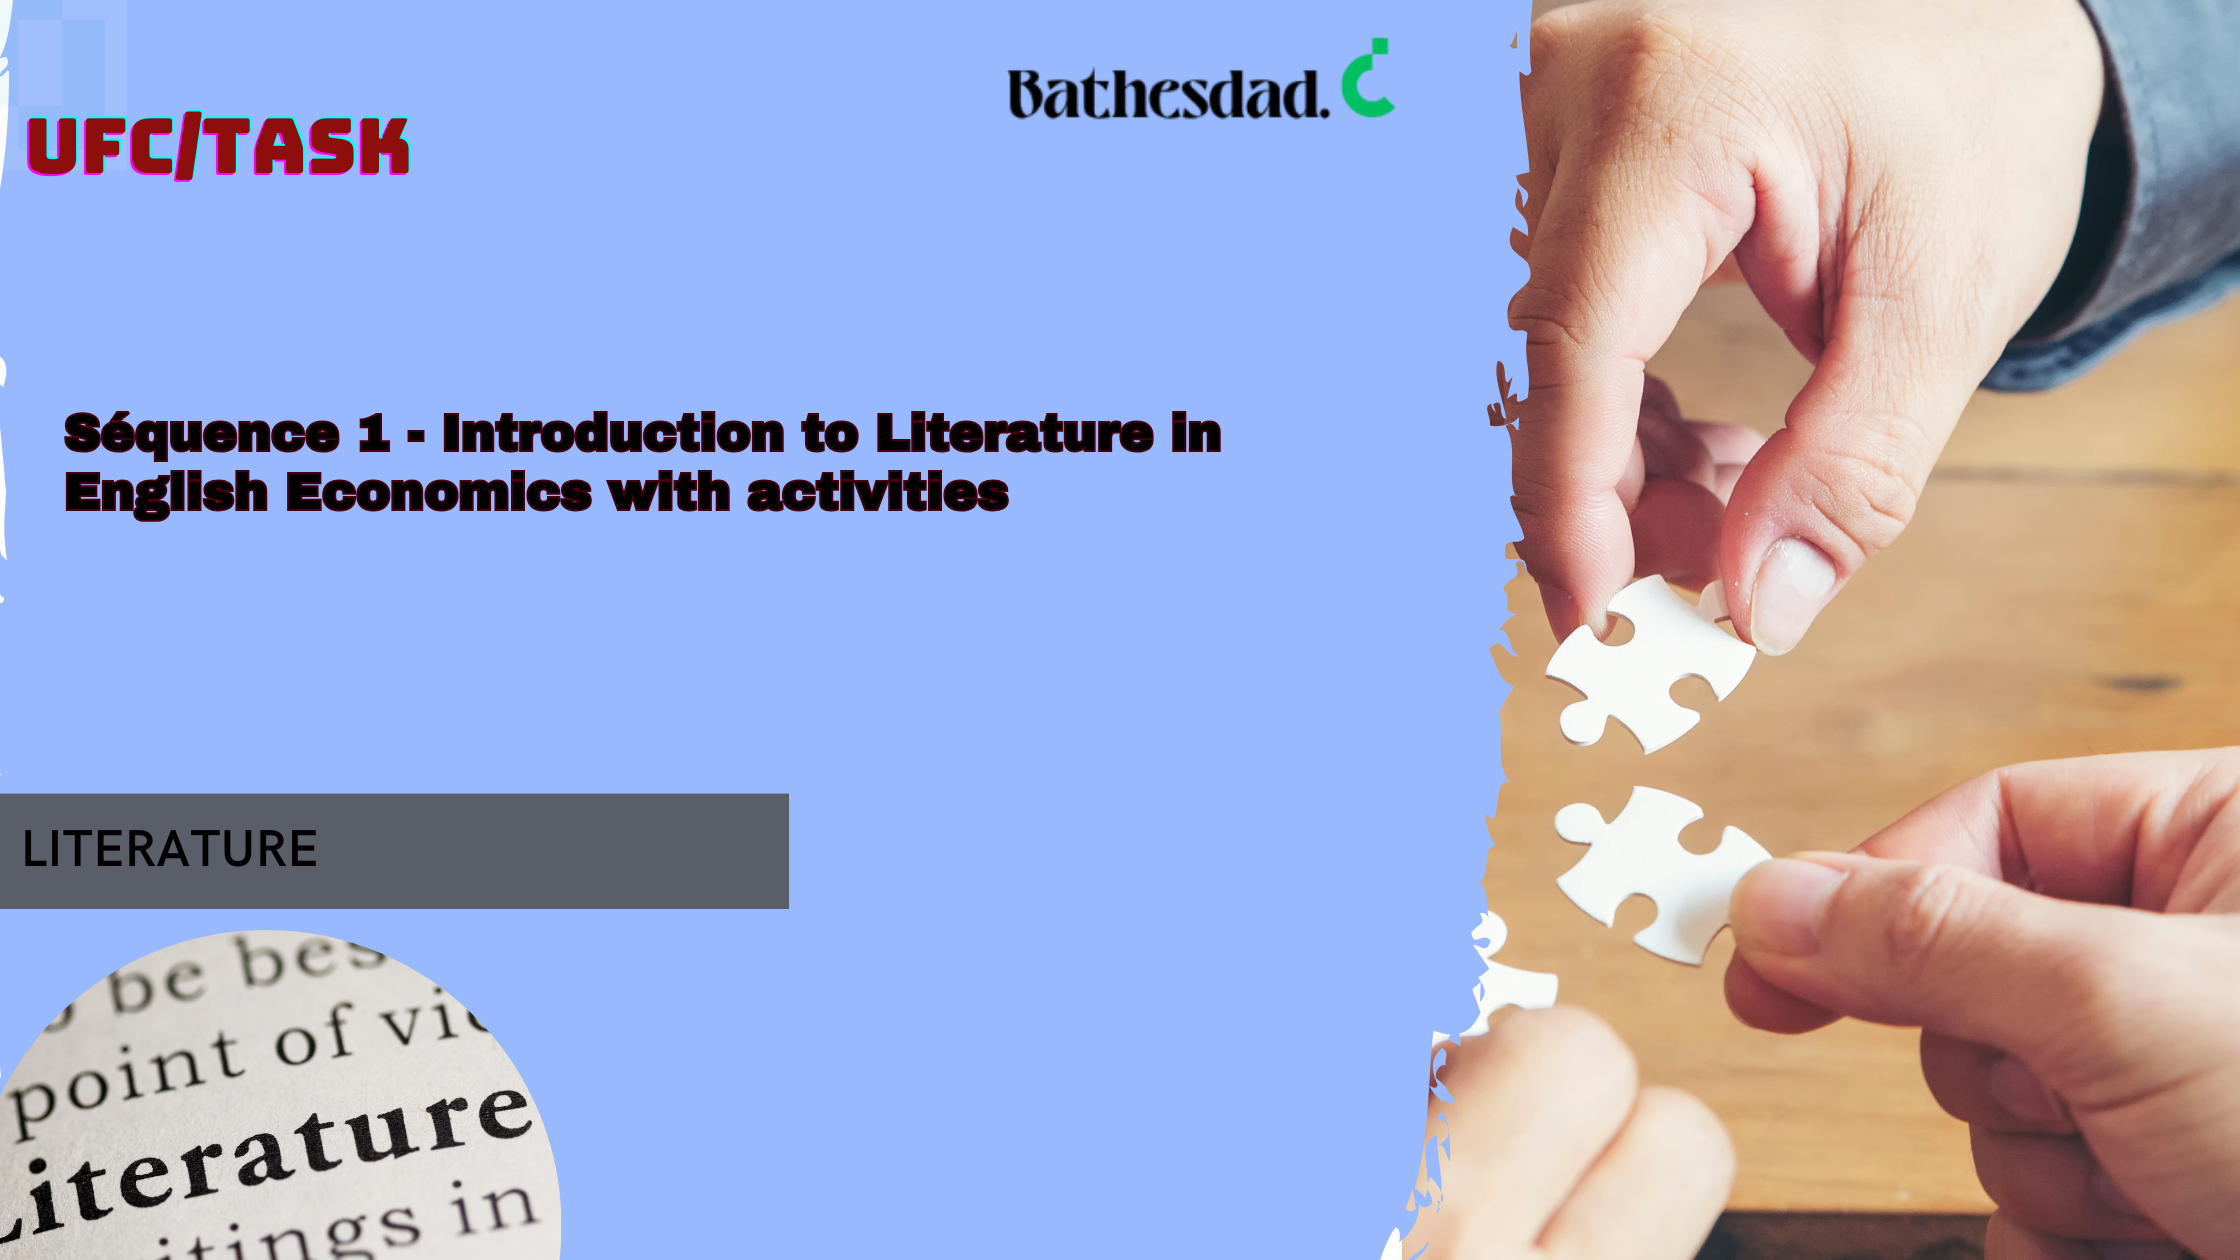 Séquence 1 - Introduction to Literature in English Economics with activities